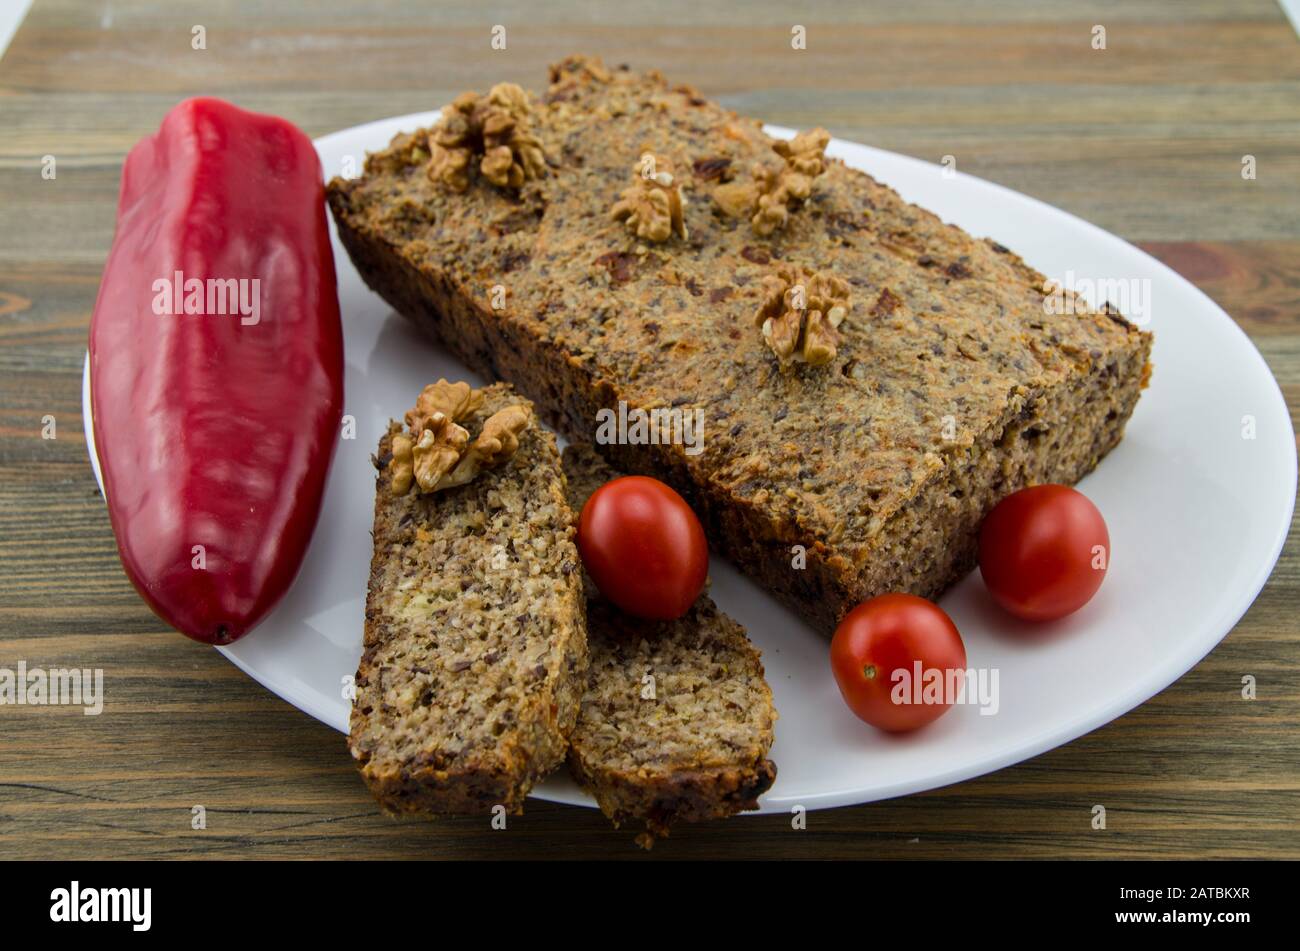 Healthy seed bread on a plate with vegetables, keto, ketogenic diet, paleo, low carbohydrate. Lifestyle change and effective weight reduction. Stock Photo